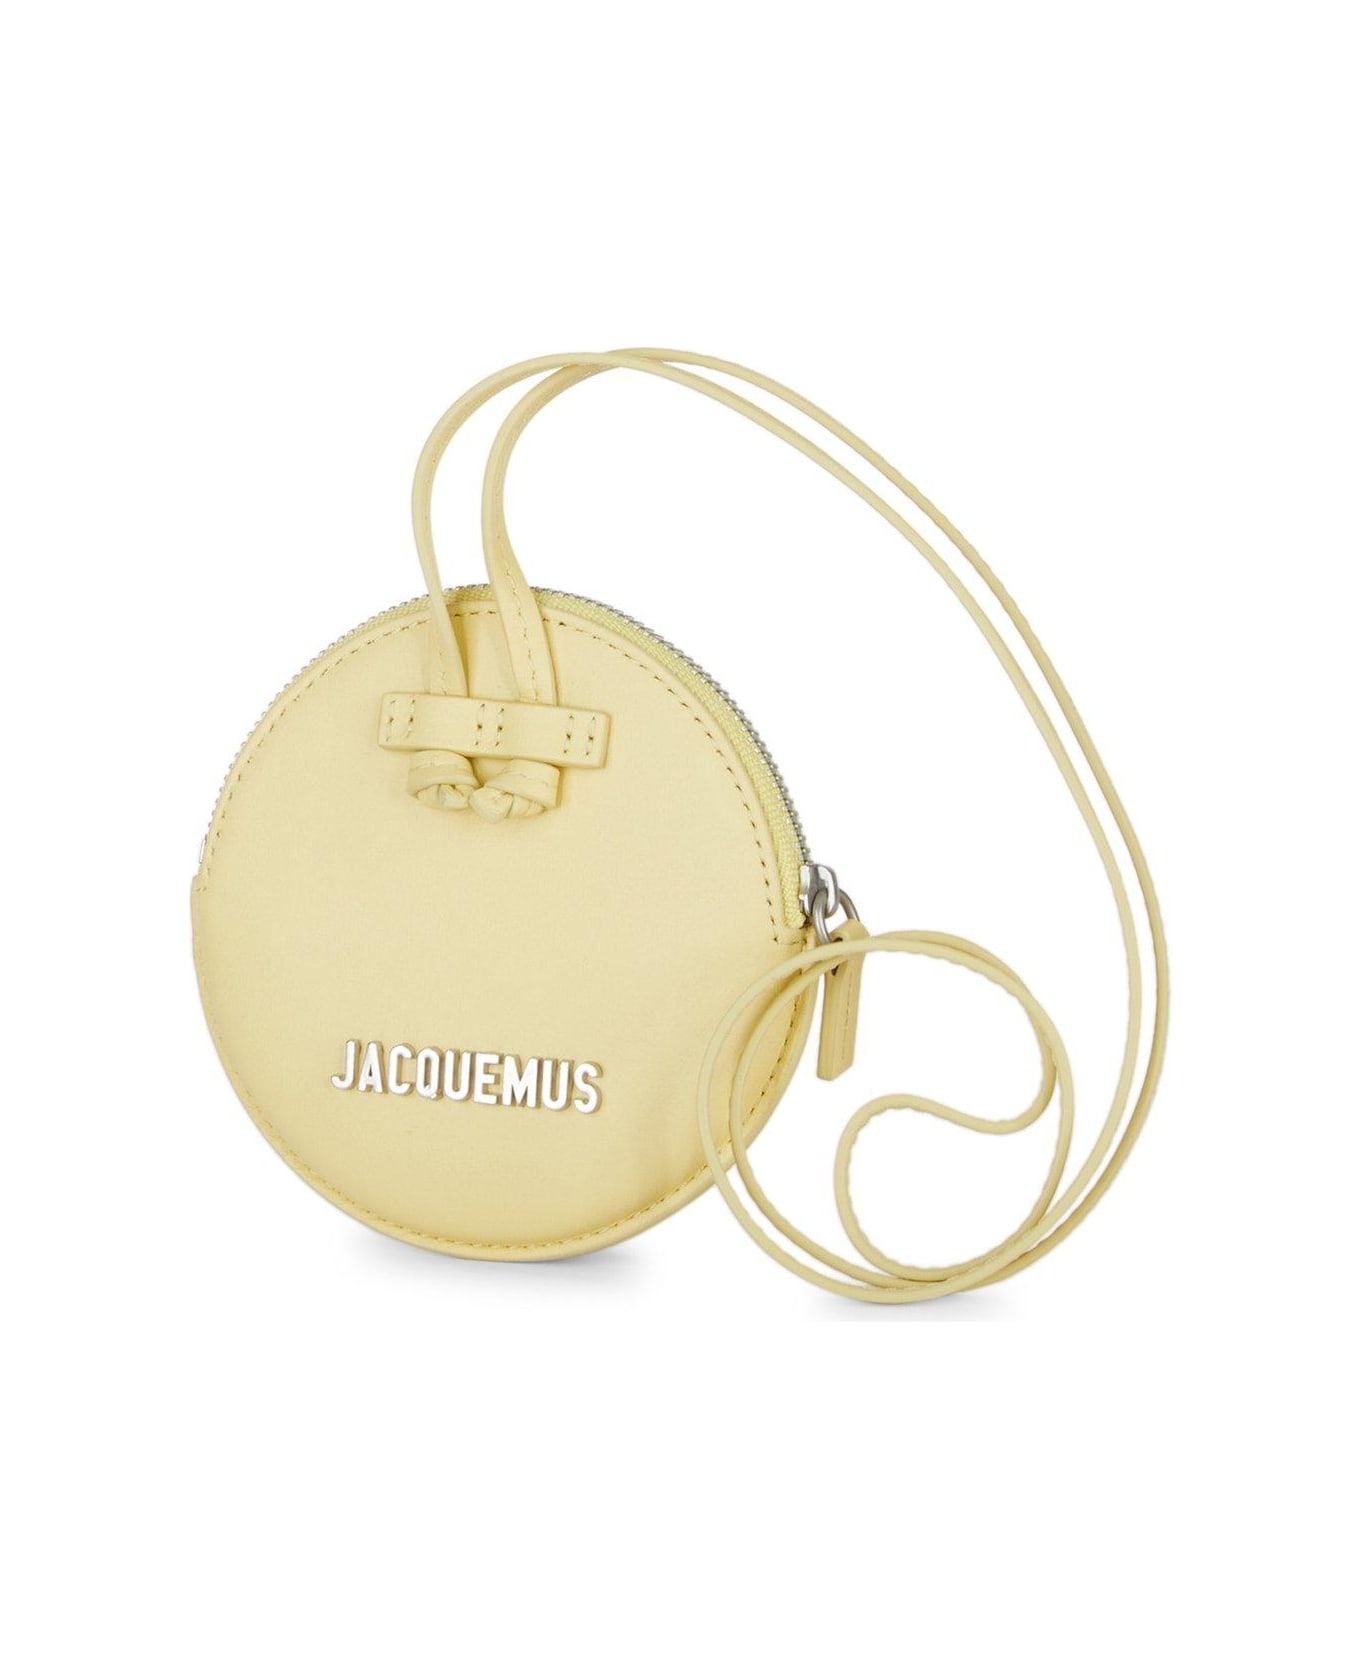 Jacquemus Le Pitchou Coin Purse - Yellow トートバッグ